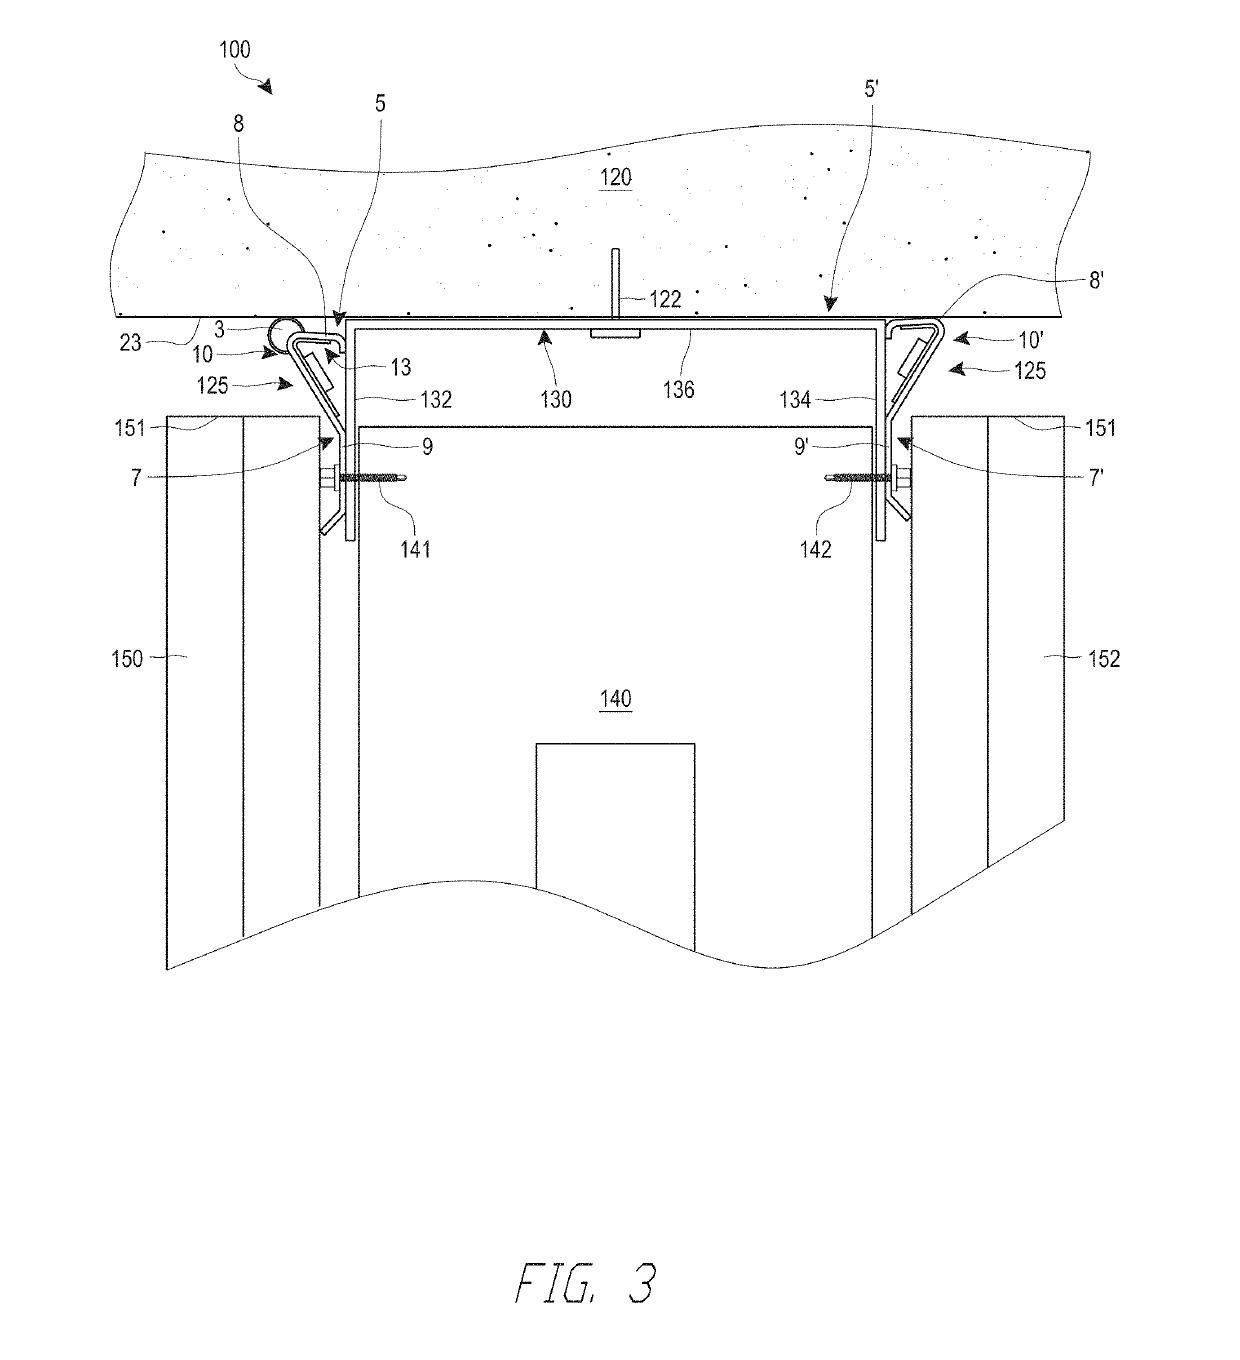 Multi-layer fire-rated joint component